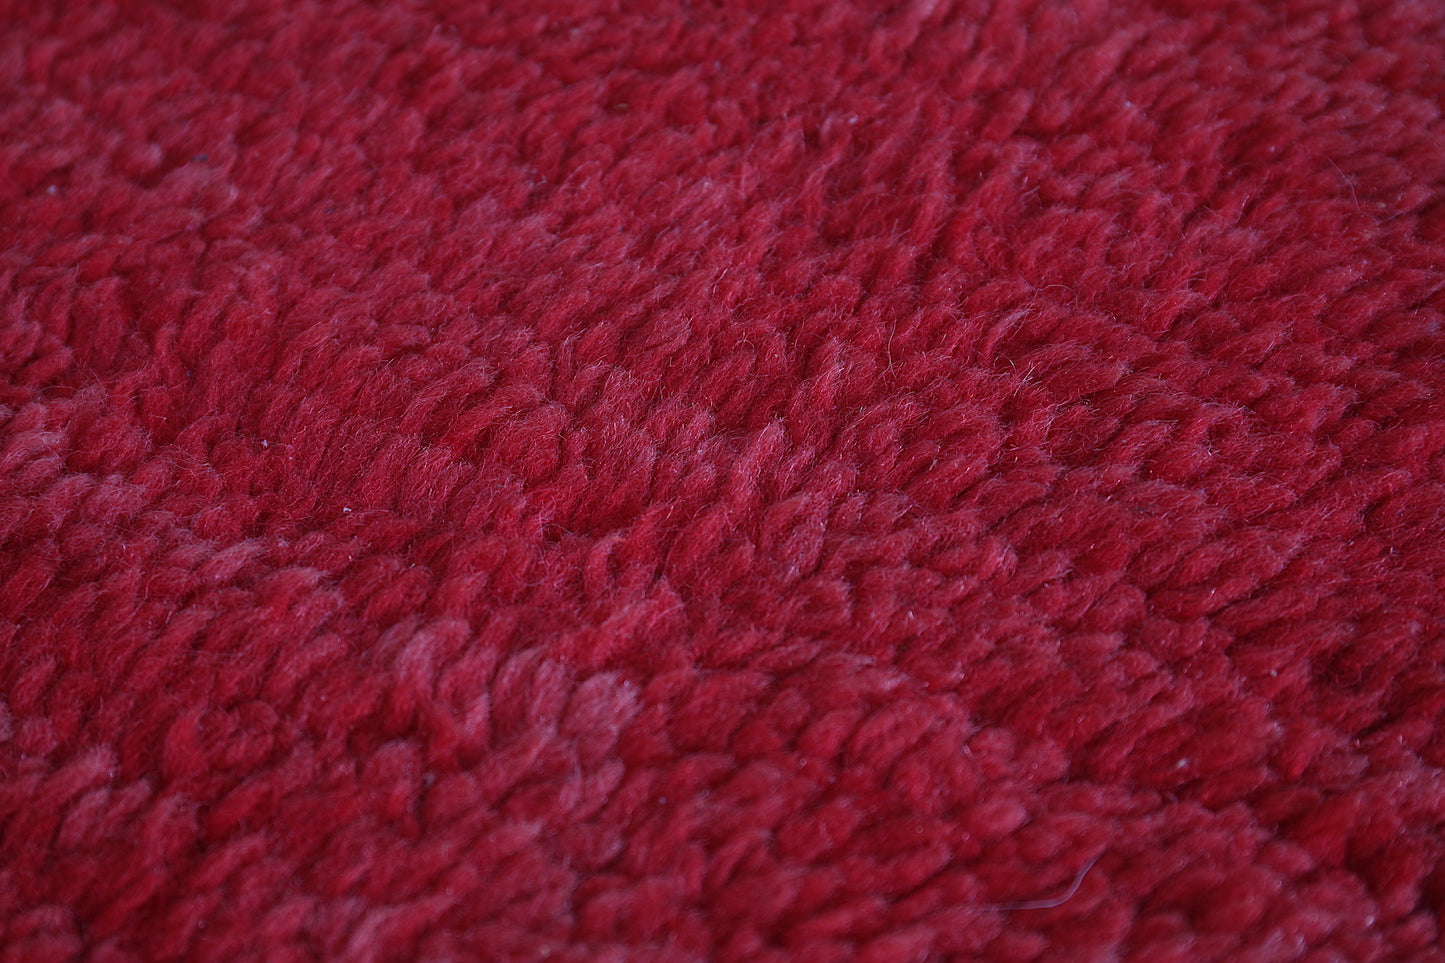 Moroccan rug red 5 FT X 11 FT